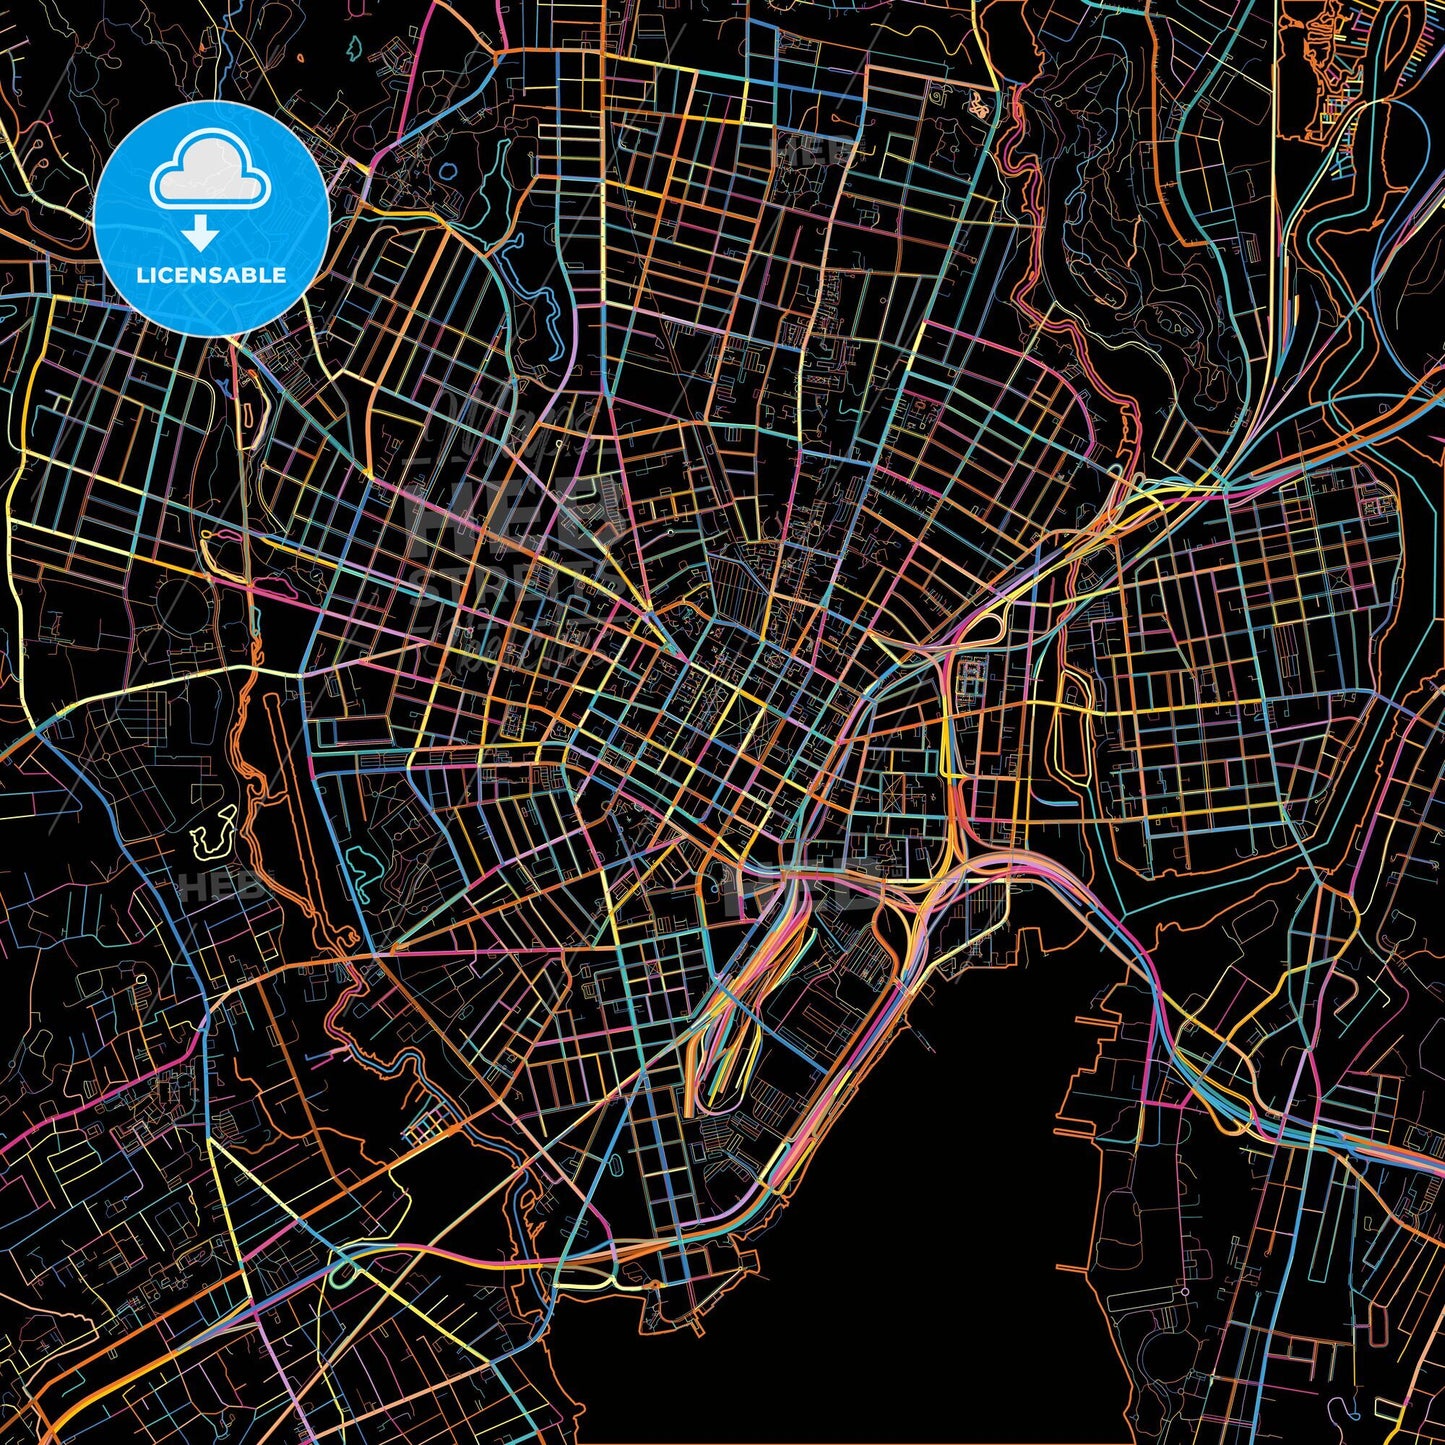 New Haven, Connecticut, United States, colorful city map on black background